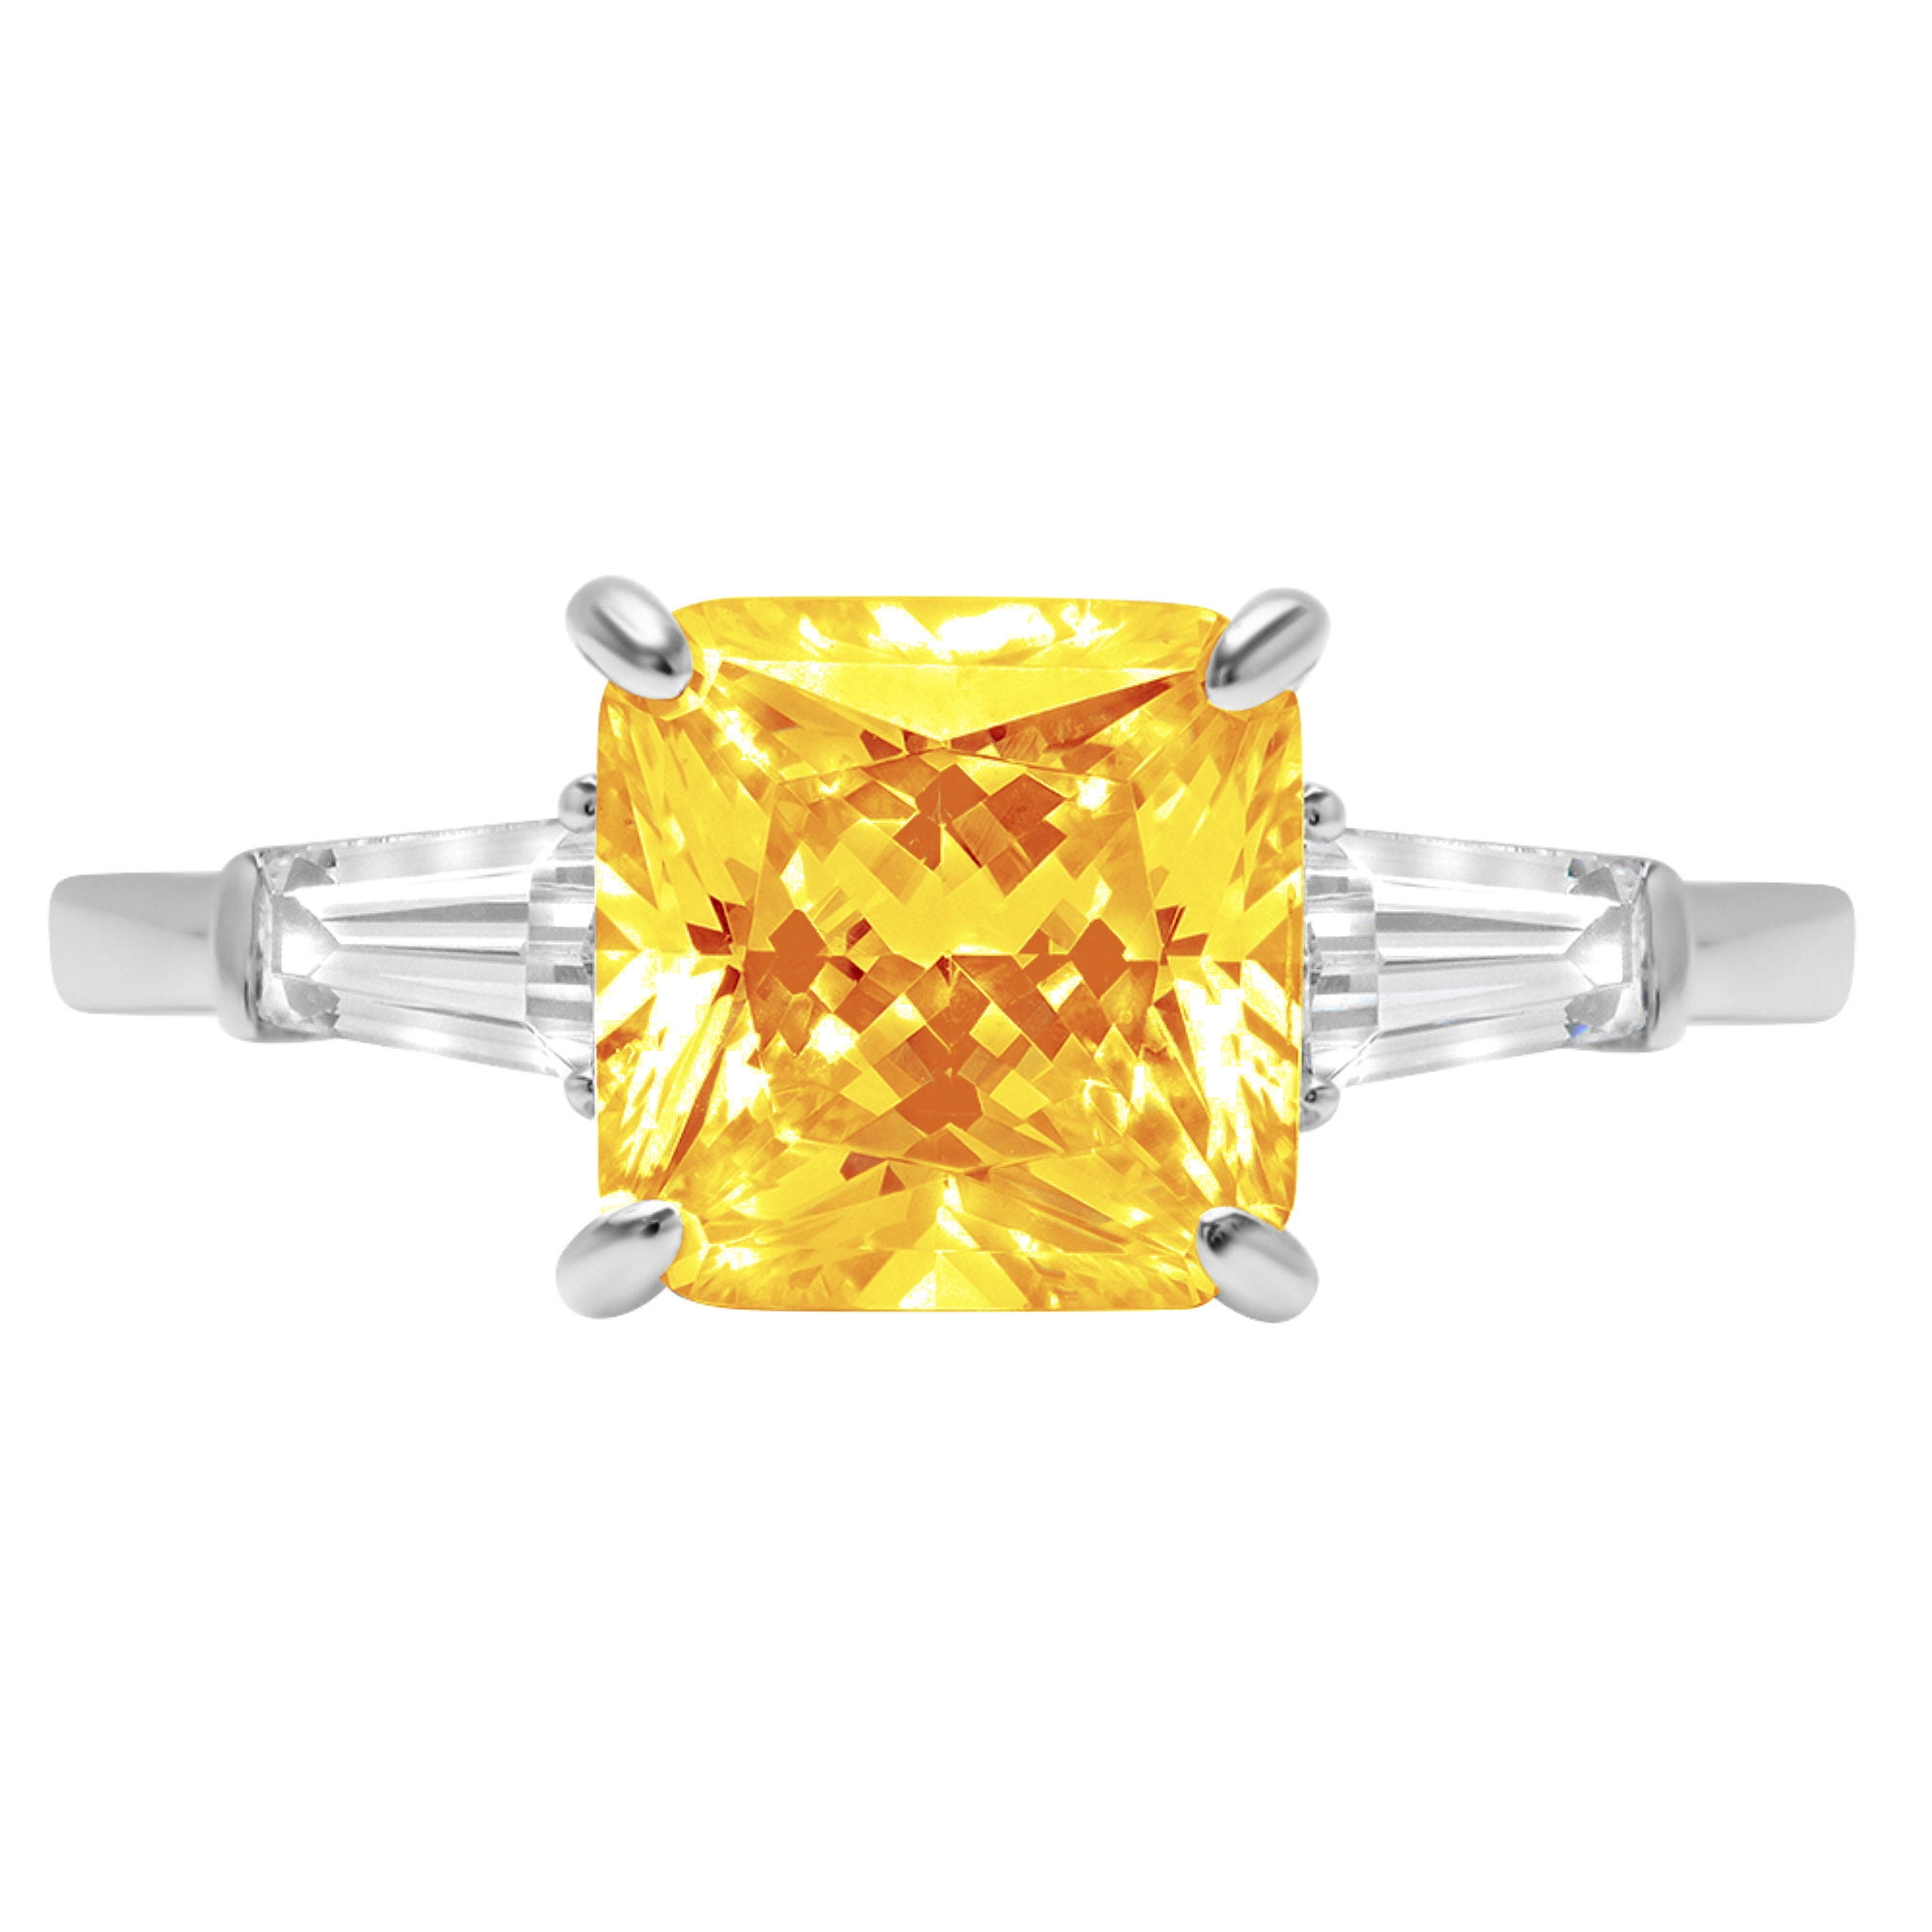 Hand Carved 3Ct Radiant Yellow Citrine Ring Women Jewelry 14K White Gold Plated 